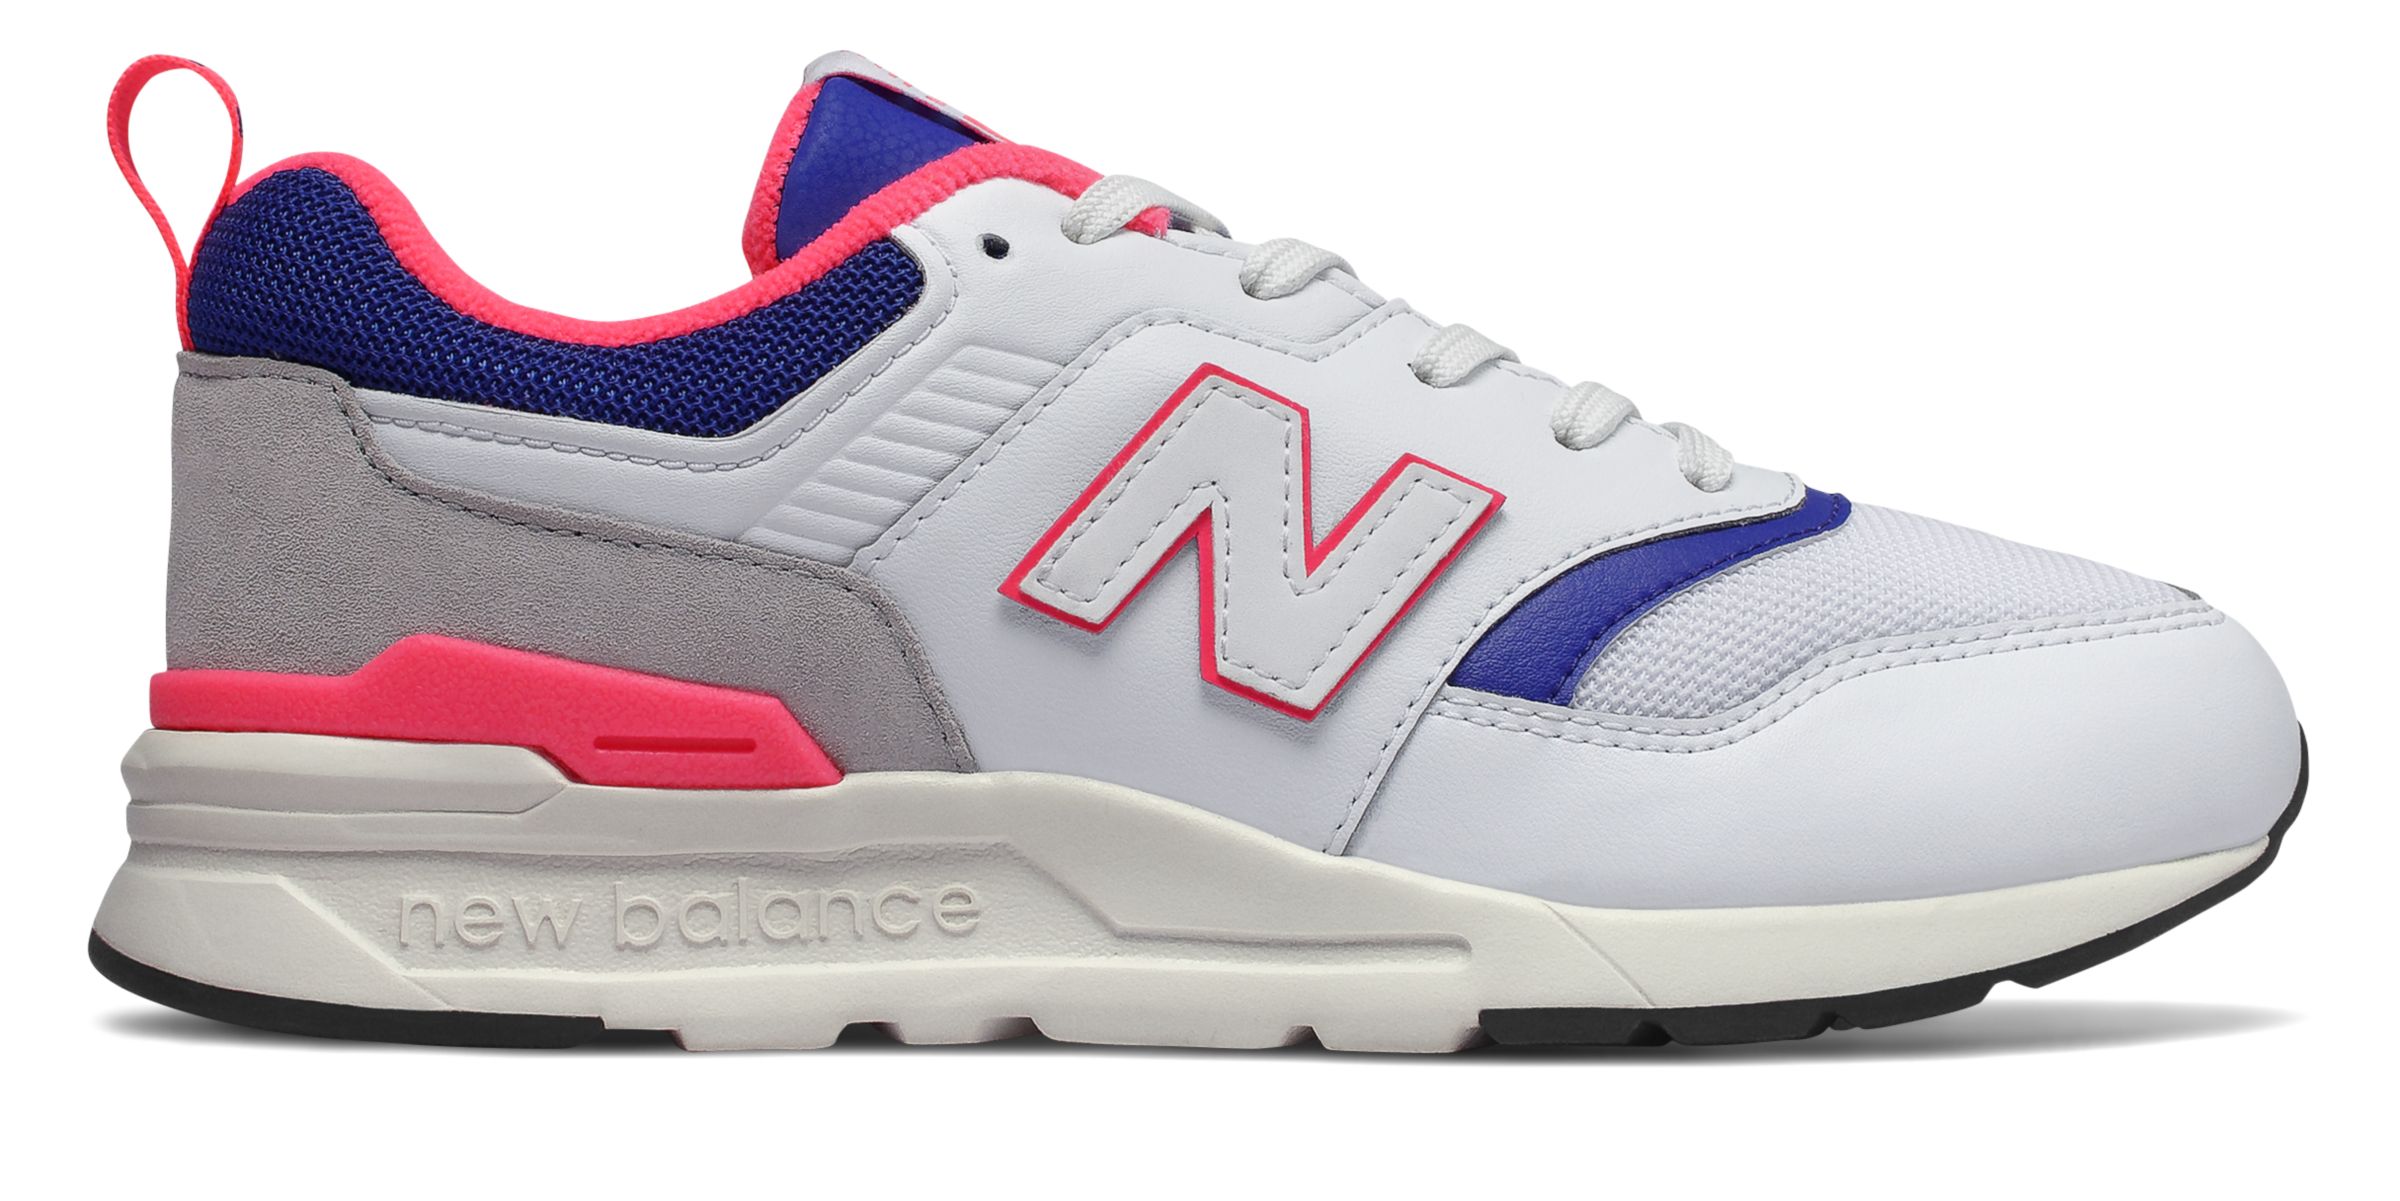 New Balance GR997H-B on Sale - Discounts Up to 60% Off on GR997HAJ at Joe's New  Balance Outlet